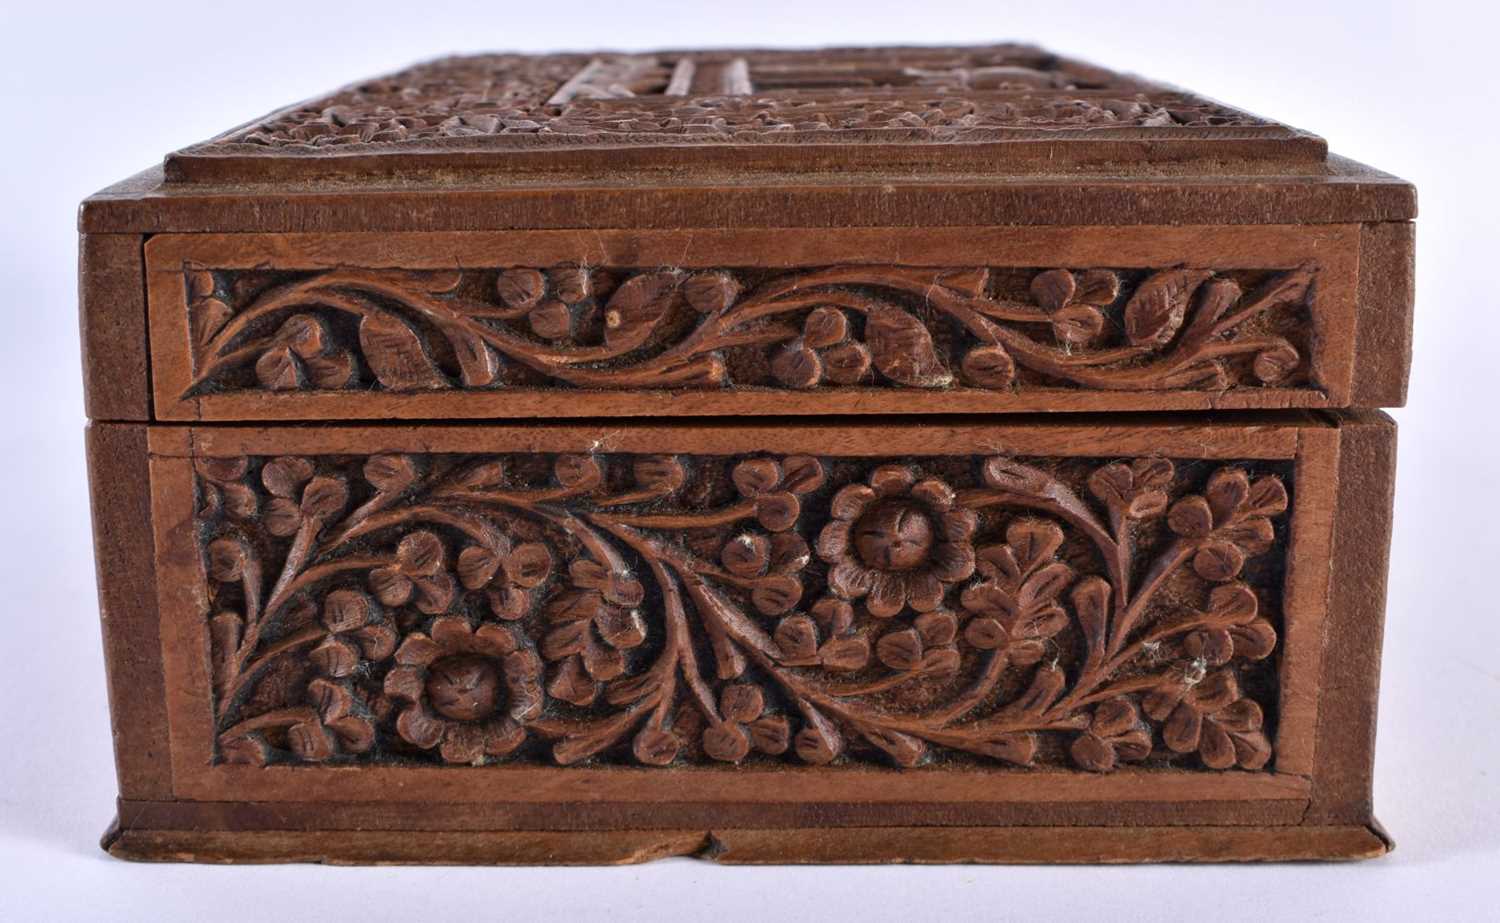 A 19TH CENTURY INDIAN CARVED SANDALWOOD TAJ MAHAL CASKET decorated with foliage and vines. 24 cm x - Image 3 of 5